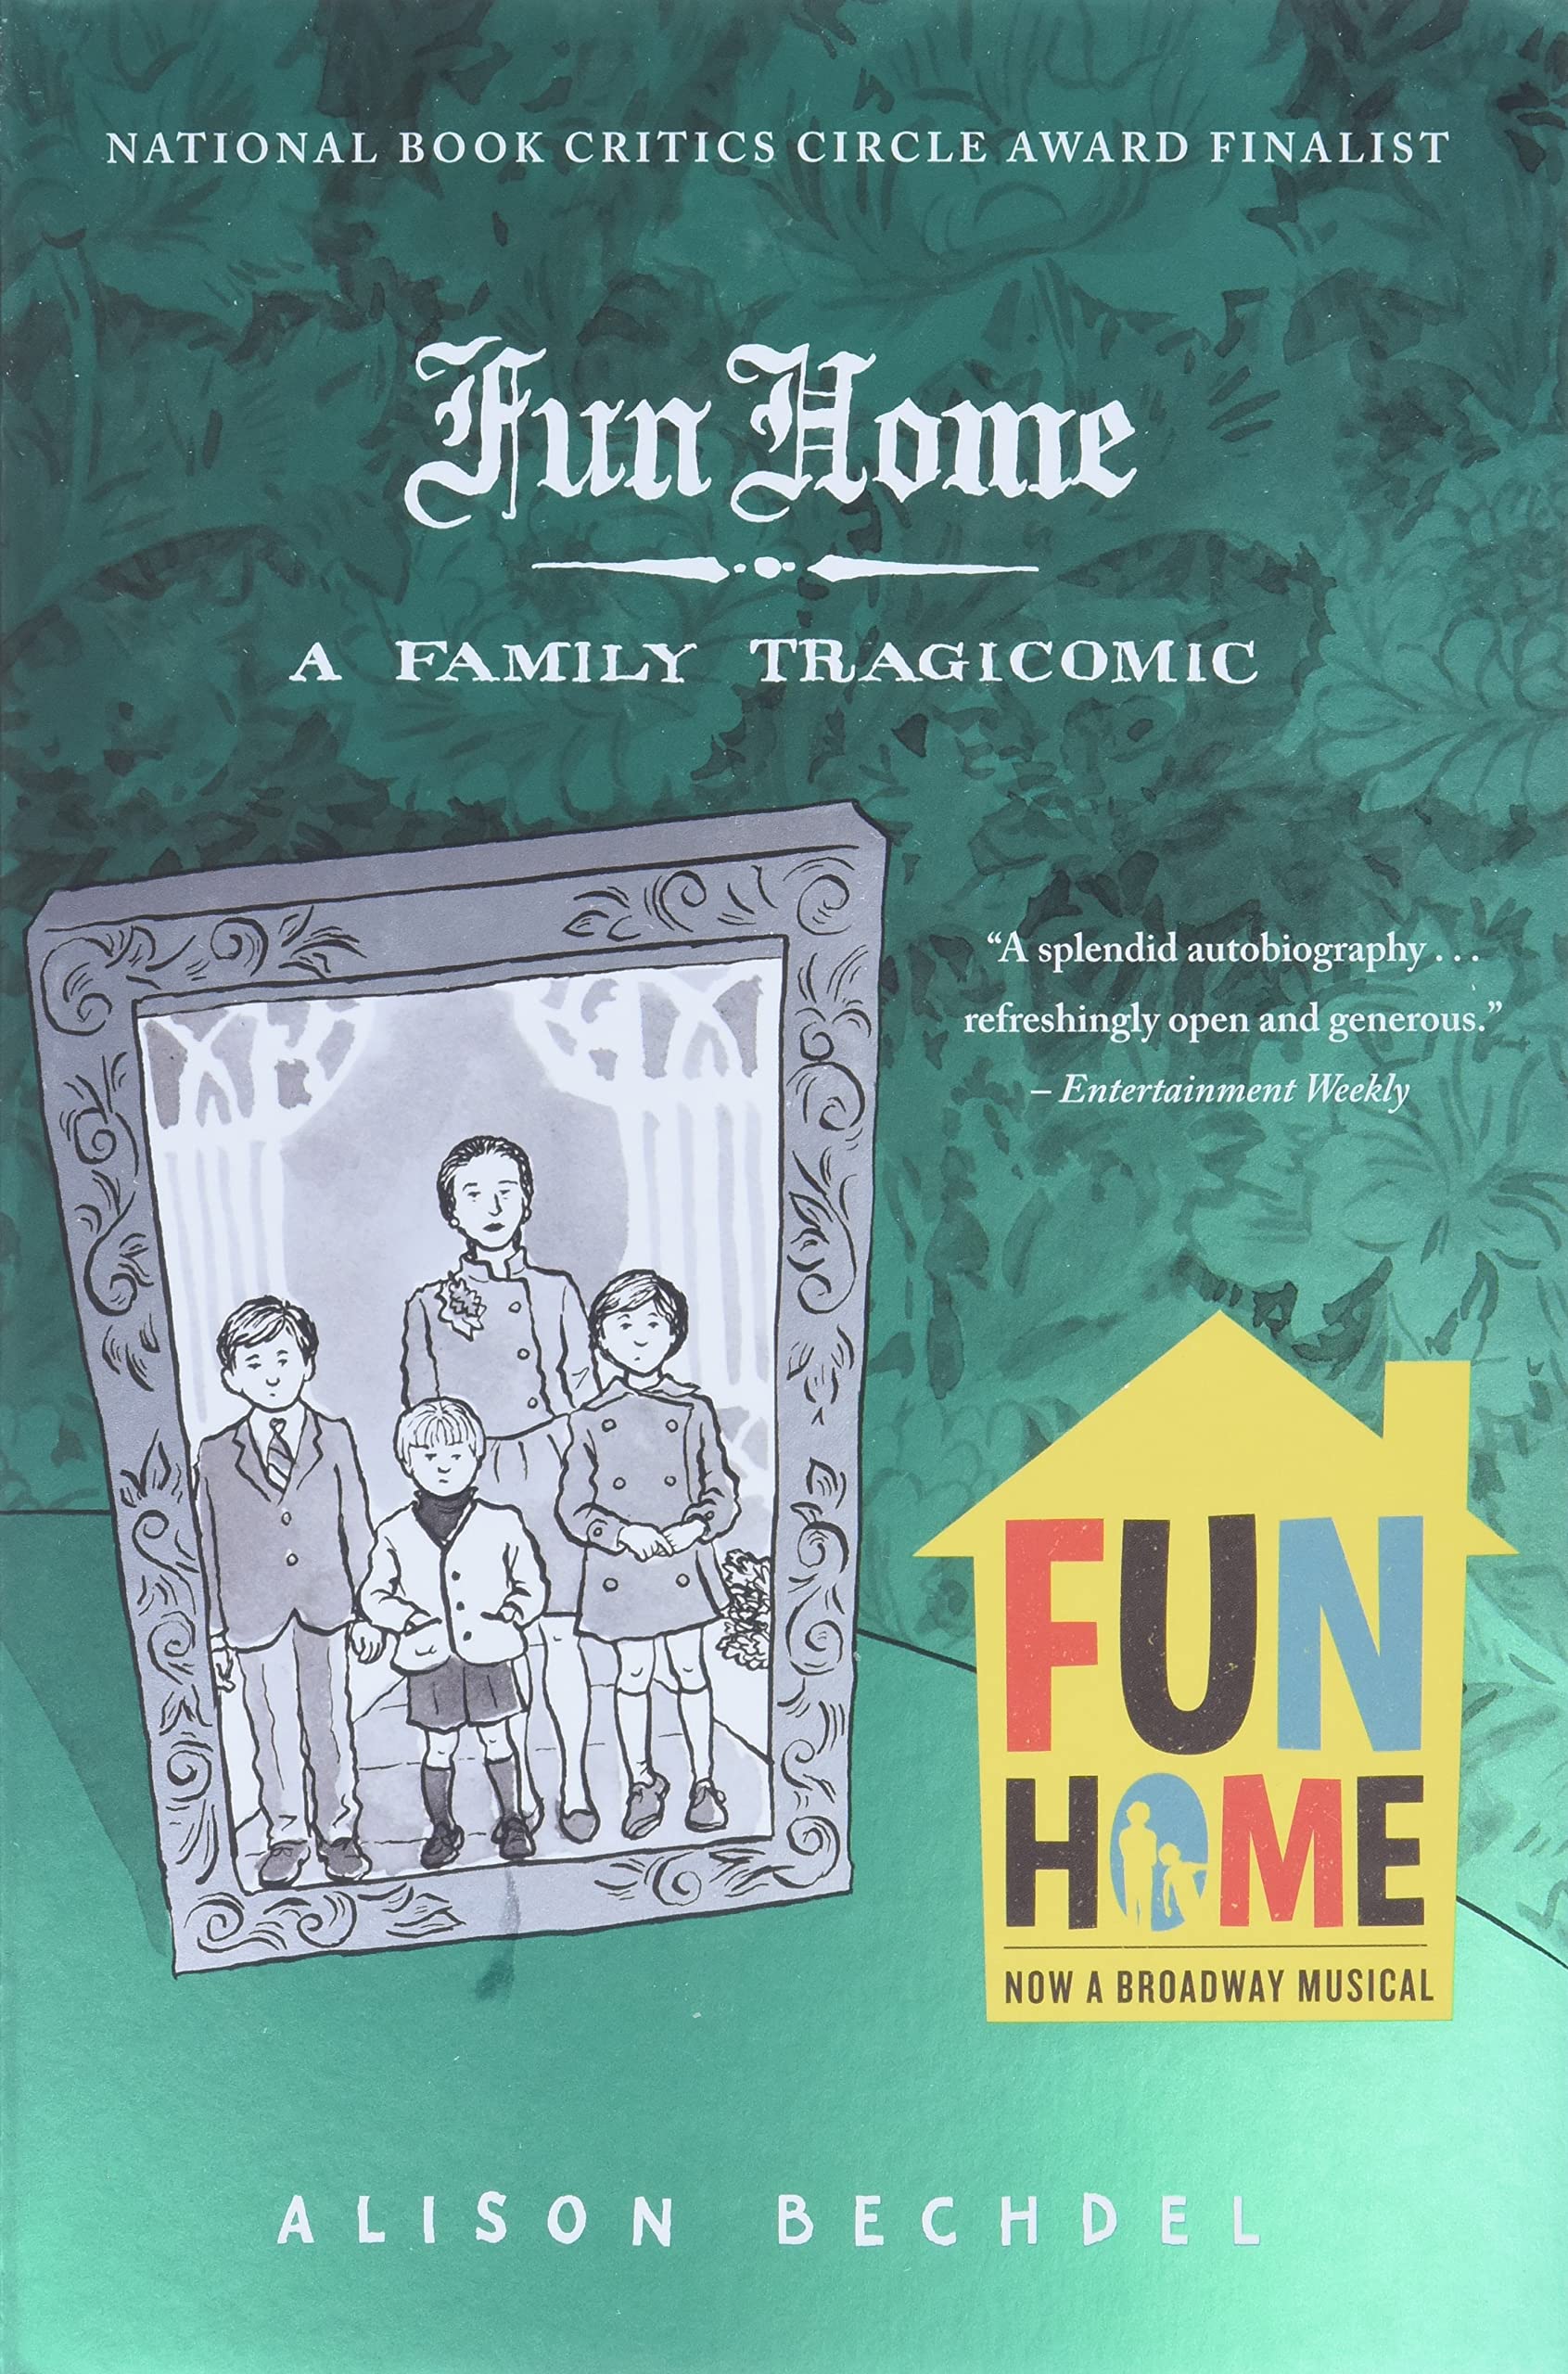 "Fun Home: A Family Tragicomic" by Alison Bechdel. Add these six LGBTQ+ books to your reading list, for comfort, insight, empathy, and enjoyment, classics and newer releases. Feed your soul.